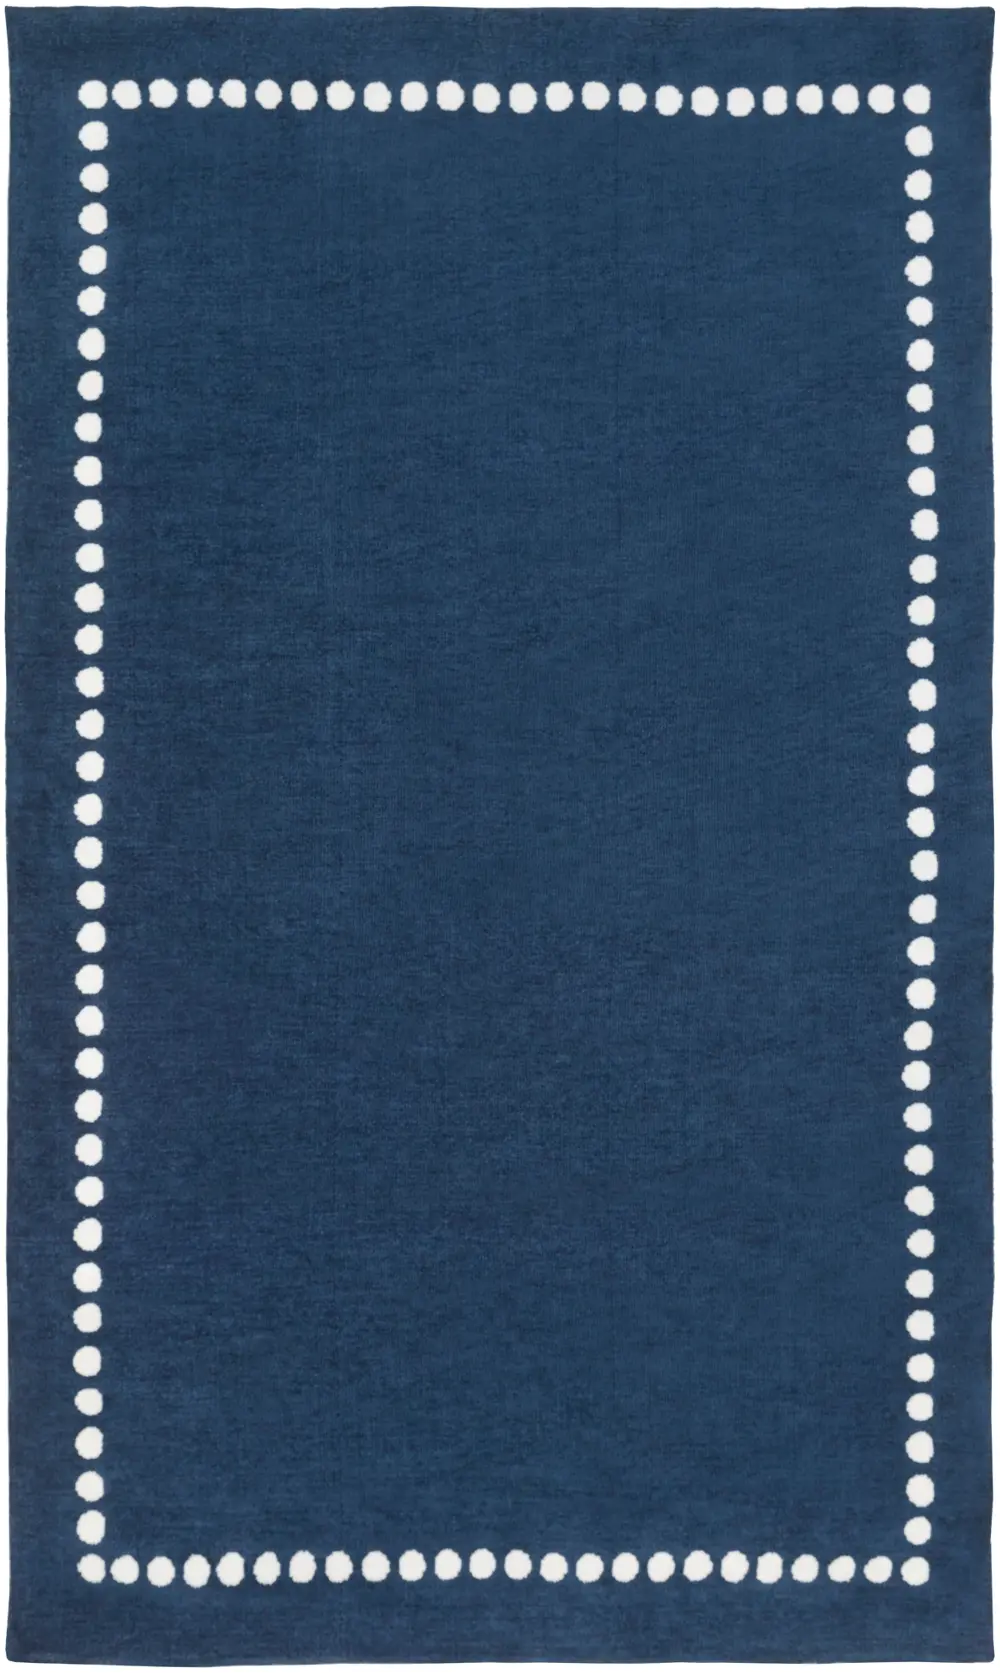 2 x 3 X-Small Navy Blue and Cream Kids Area Rug - Abigail-1